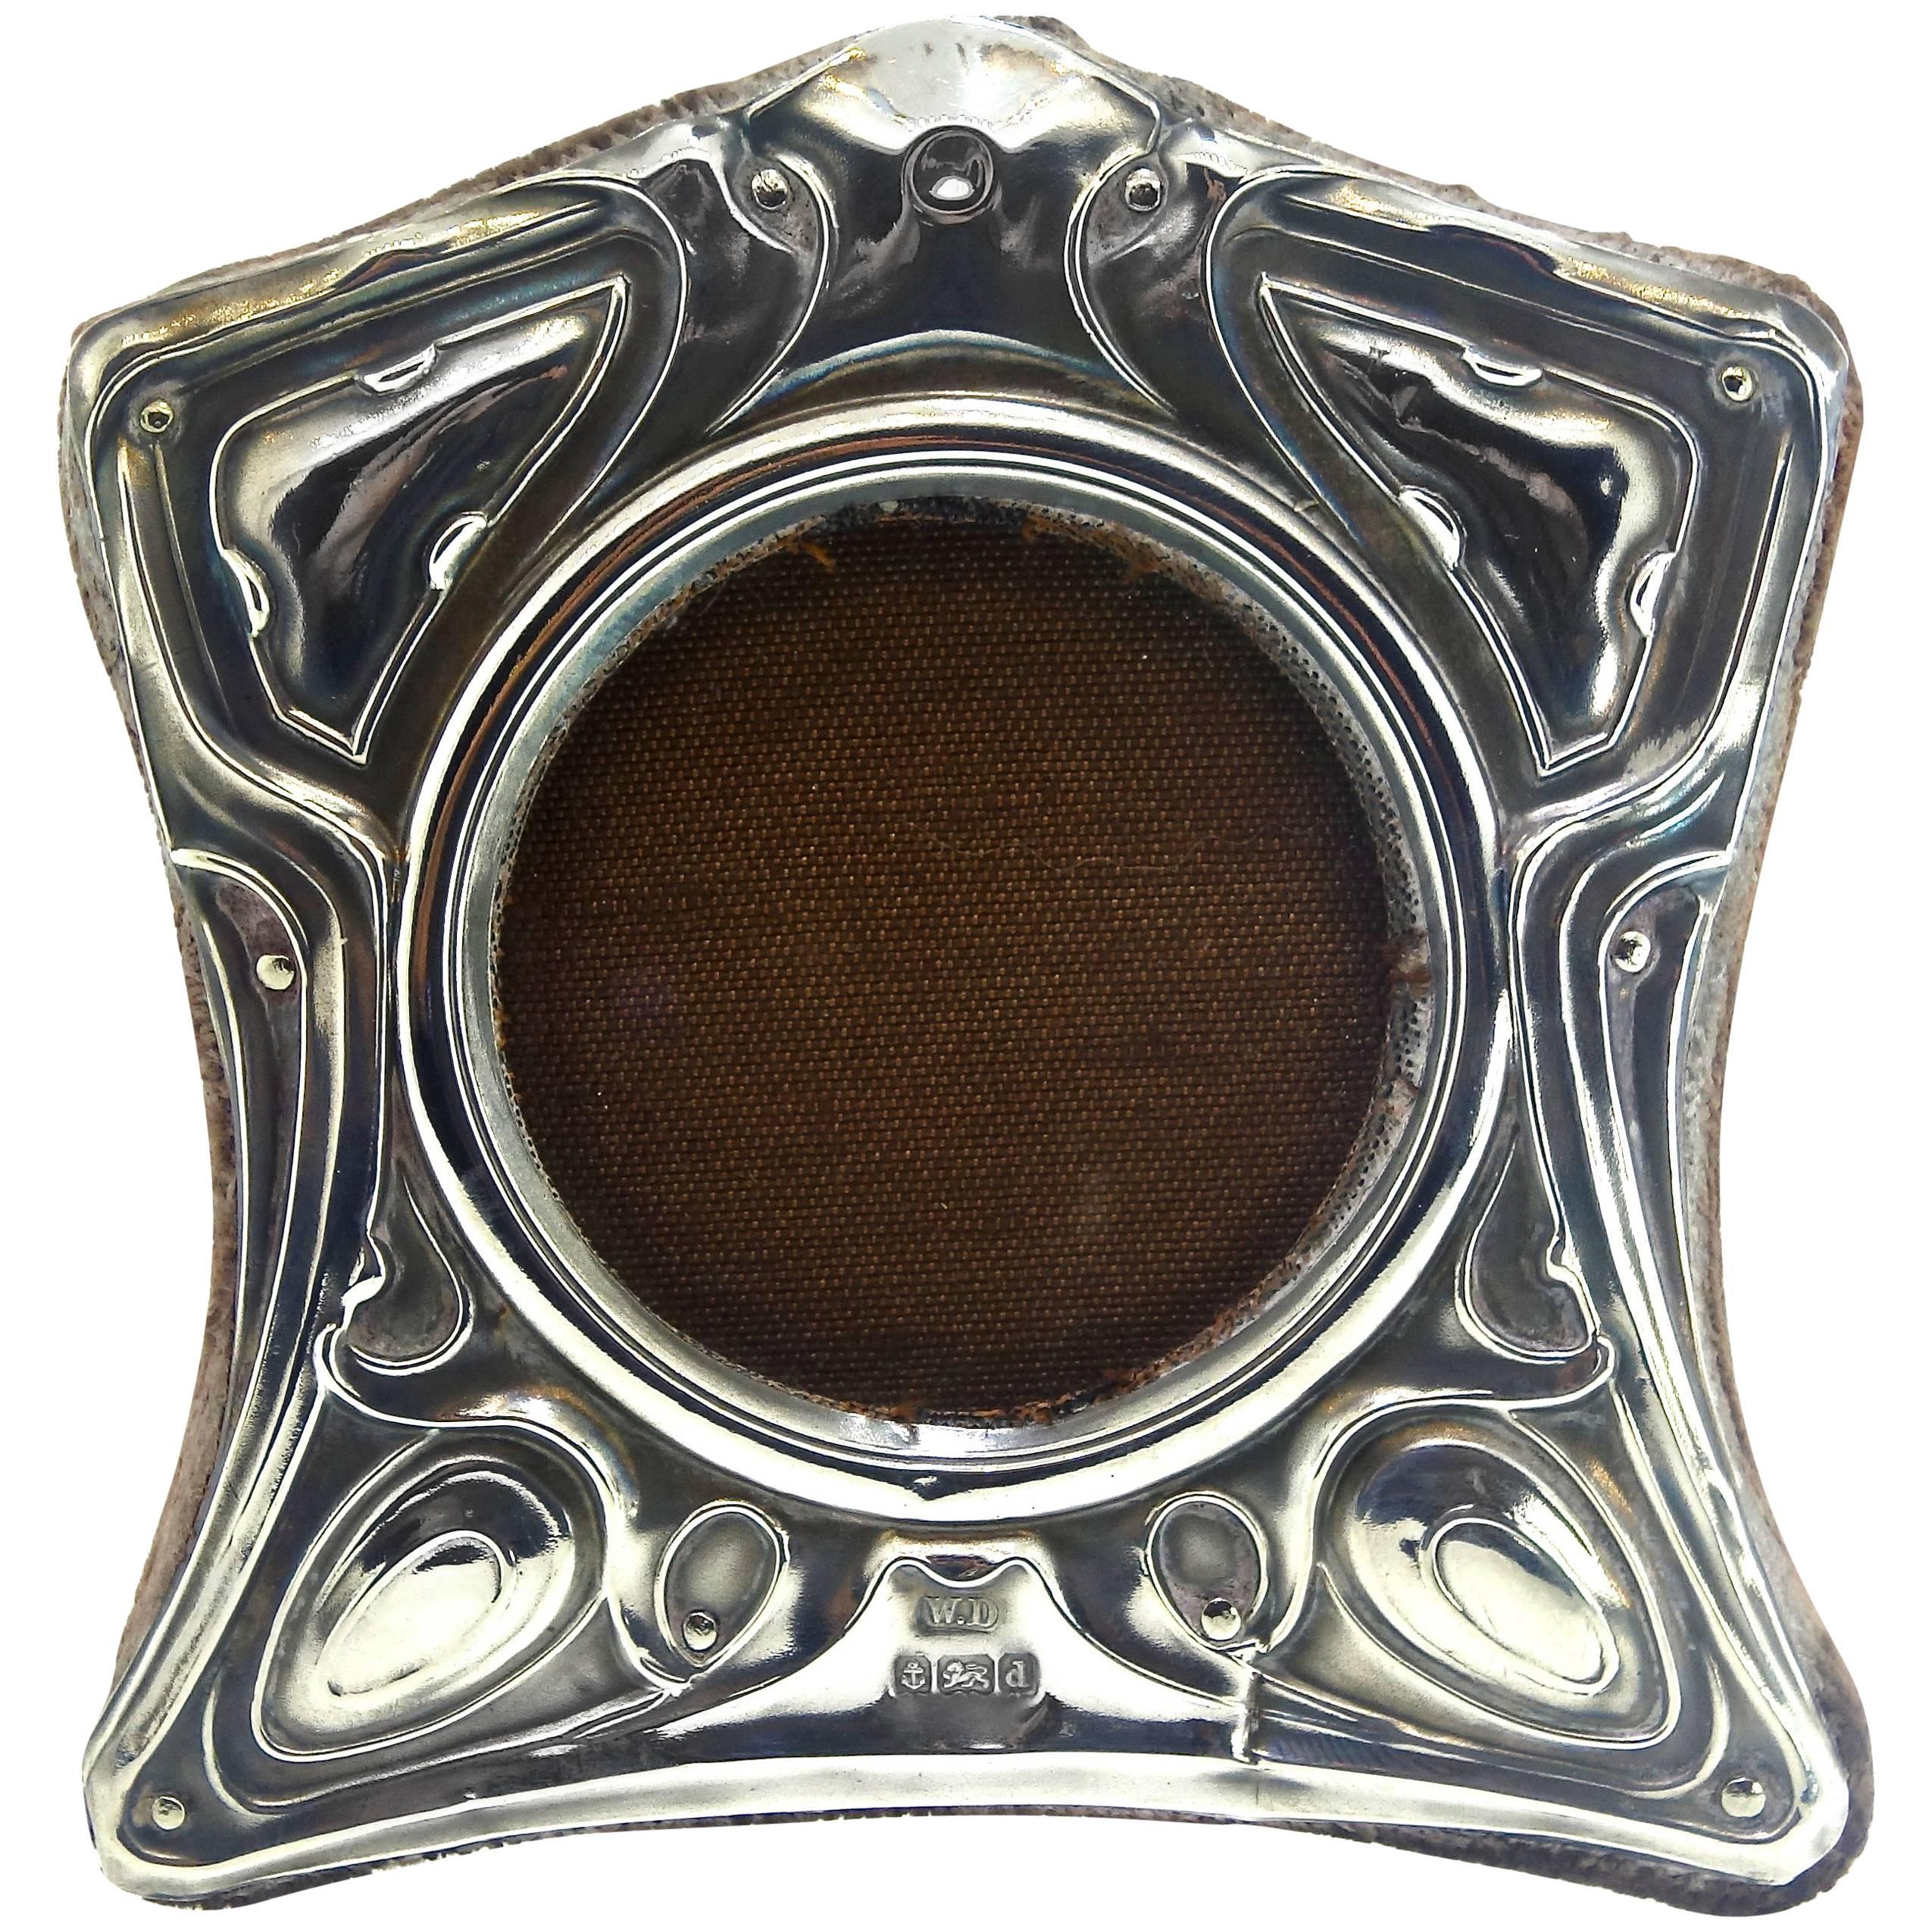 Antique silver frame, with the initials W.D, an anchor, lion and a small d, (see our magnified photos), this period frame is backed with the original velvet cloth.  As with many objects made about 120 years ago, there is a very slight discoloration